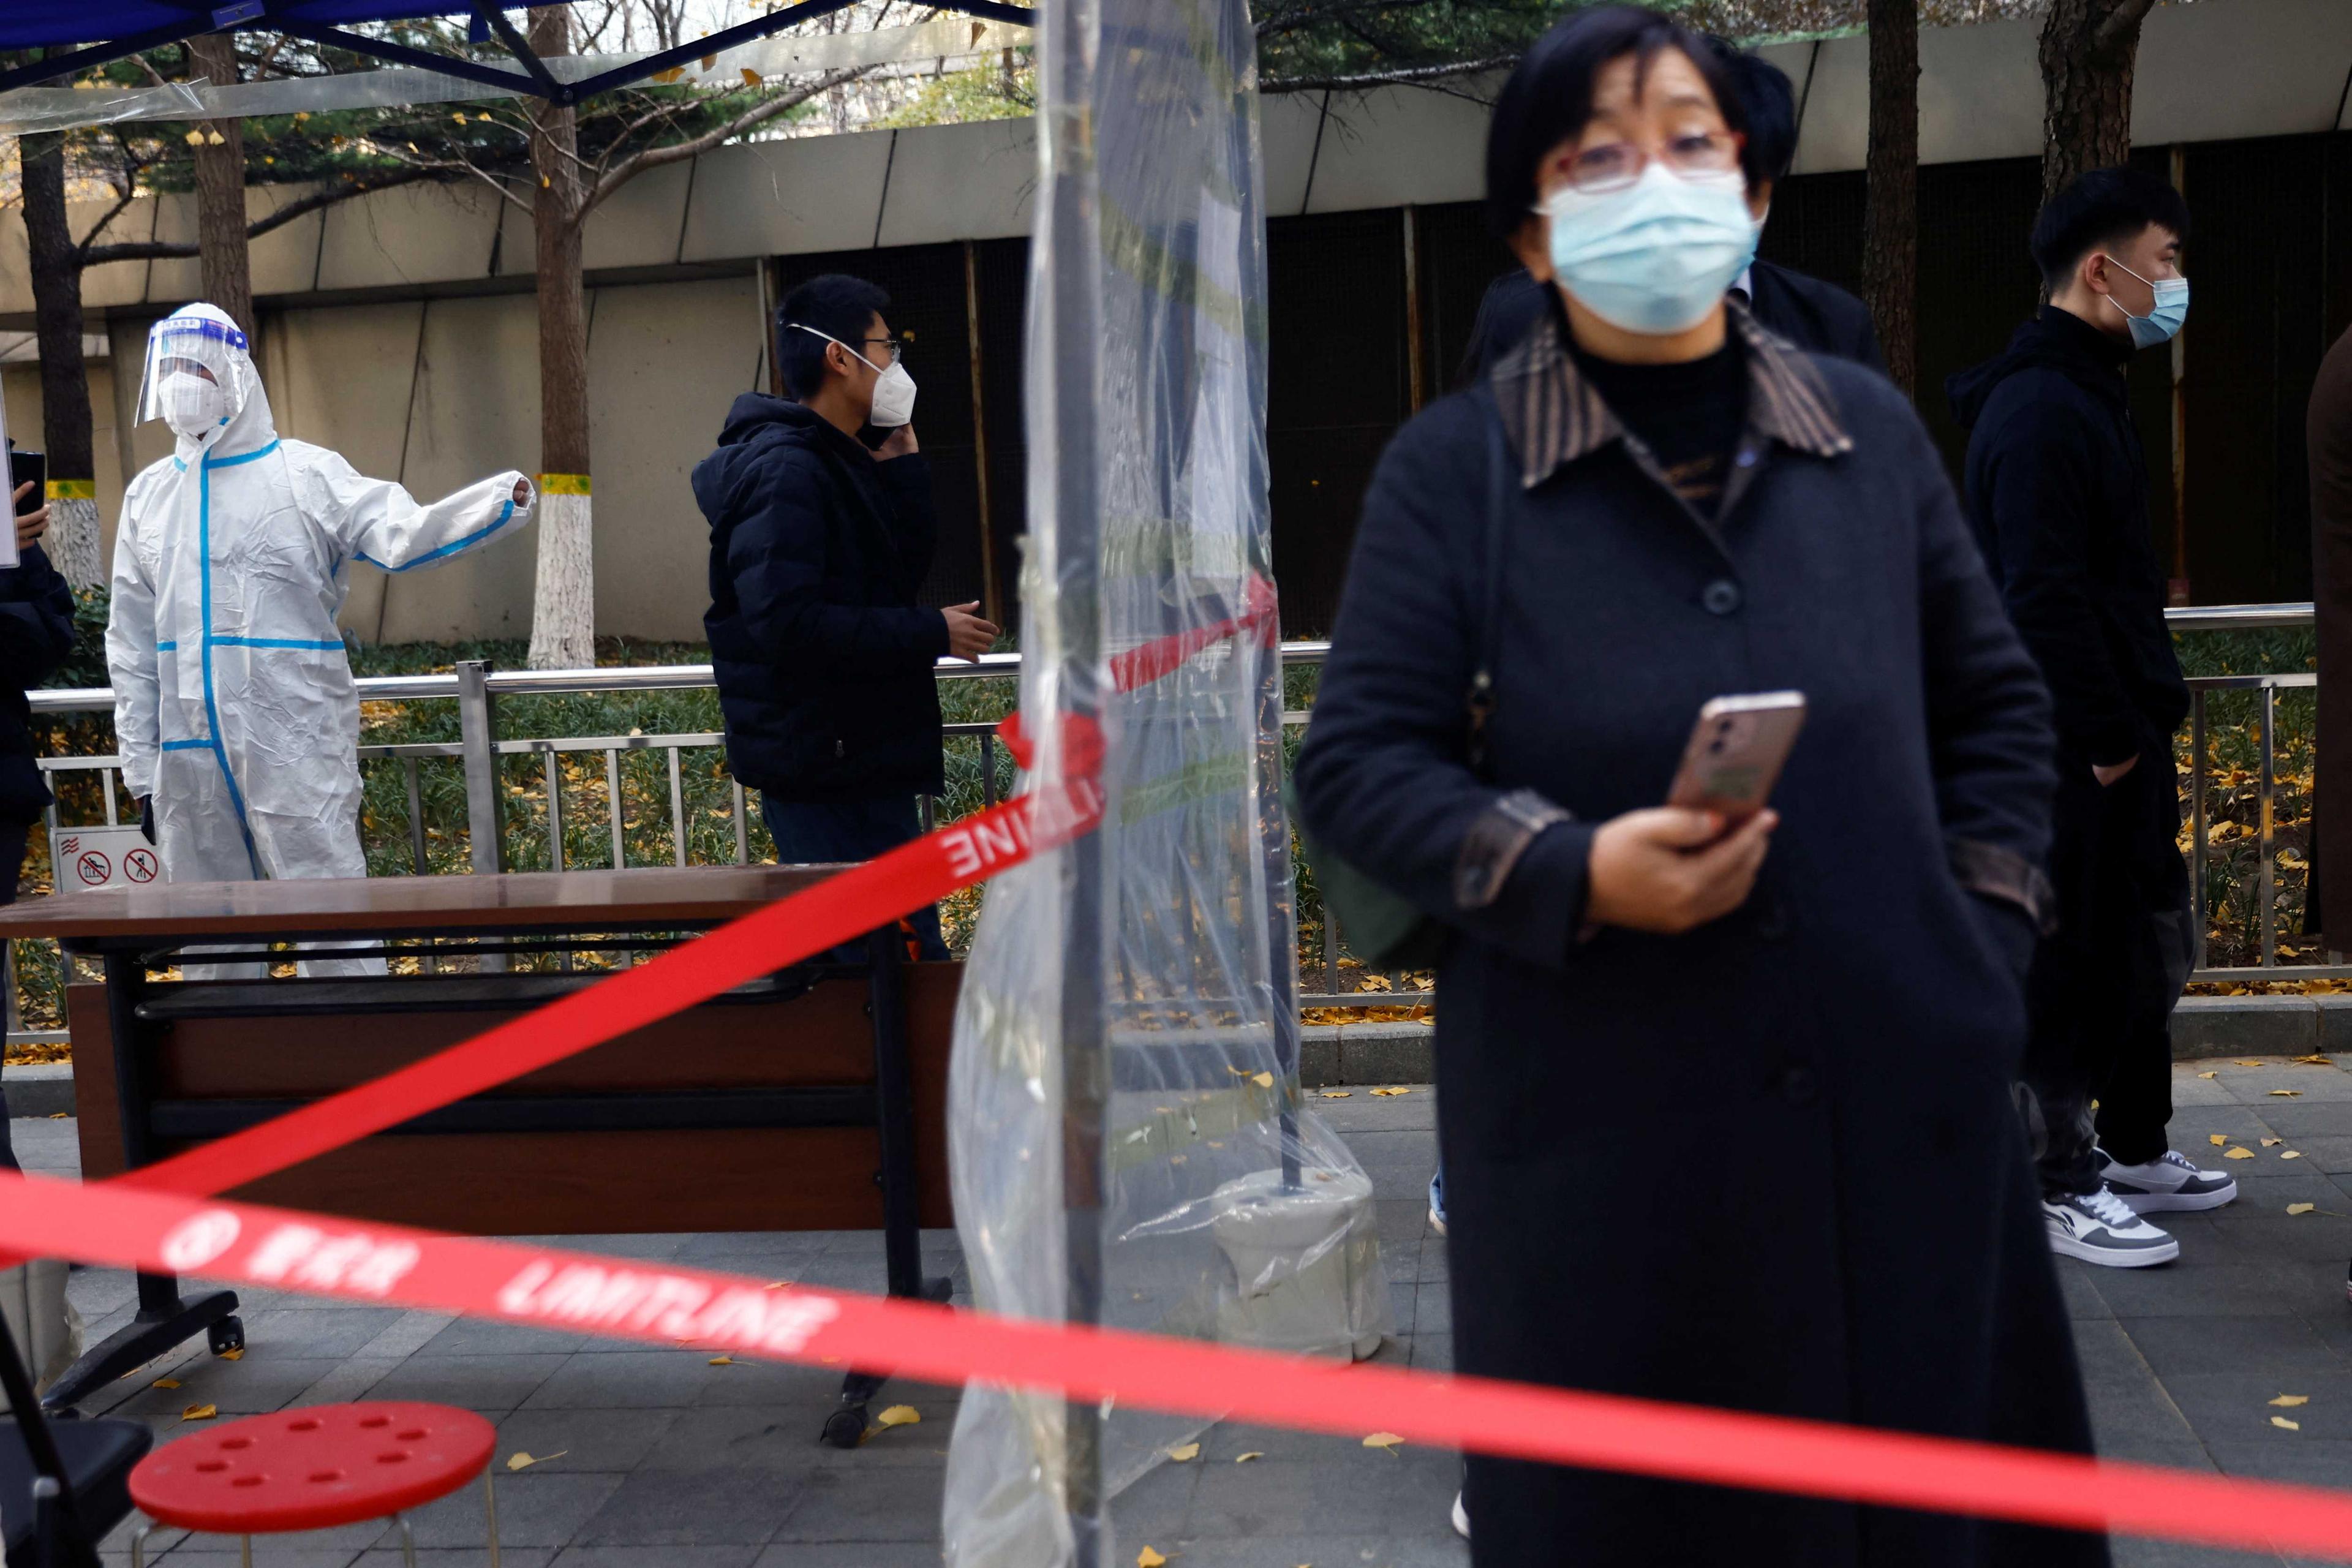 A worker in a protective suit guides people to take a nucleic acid test for Covid-19 at a testing booth near an office building in Central Business District in Chaoyang district, Beijing, China on Nov 15. Photo: Reuters